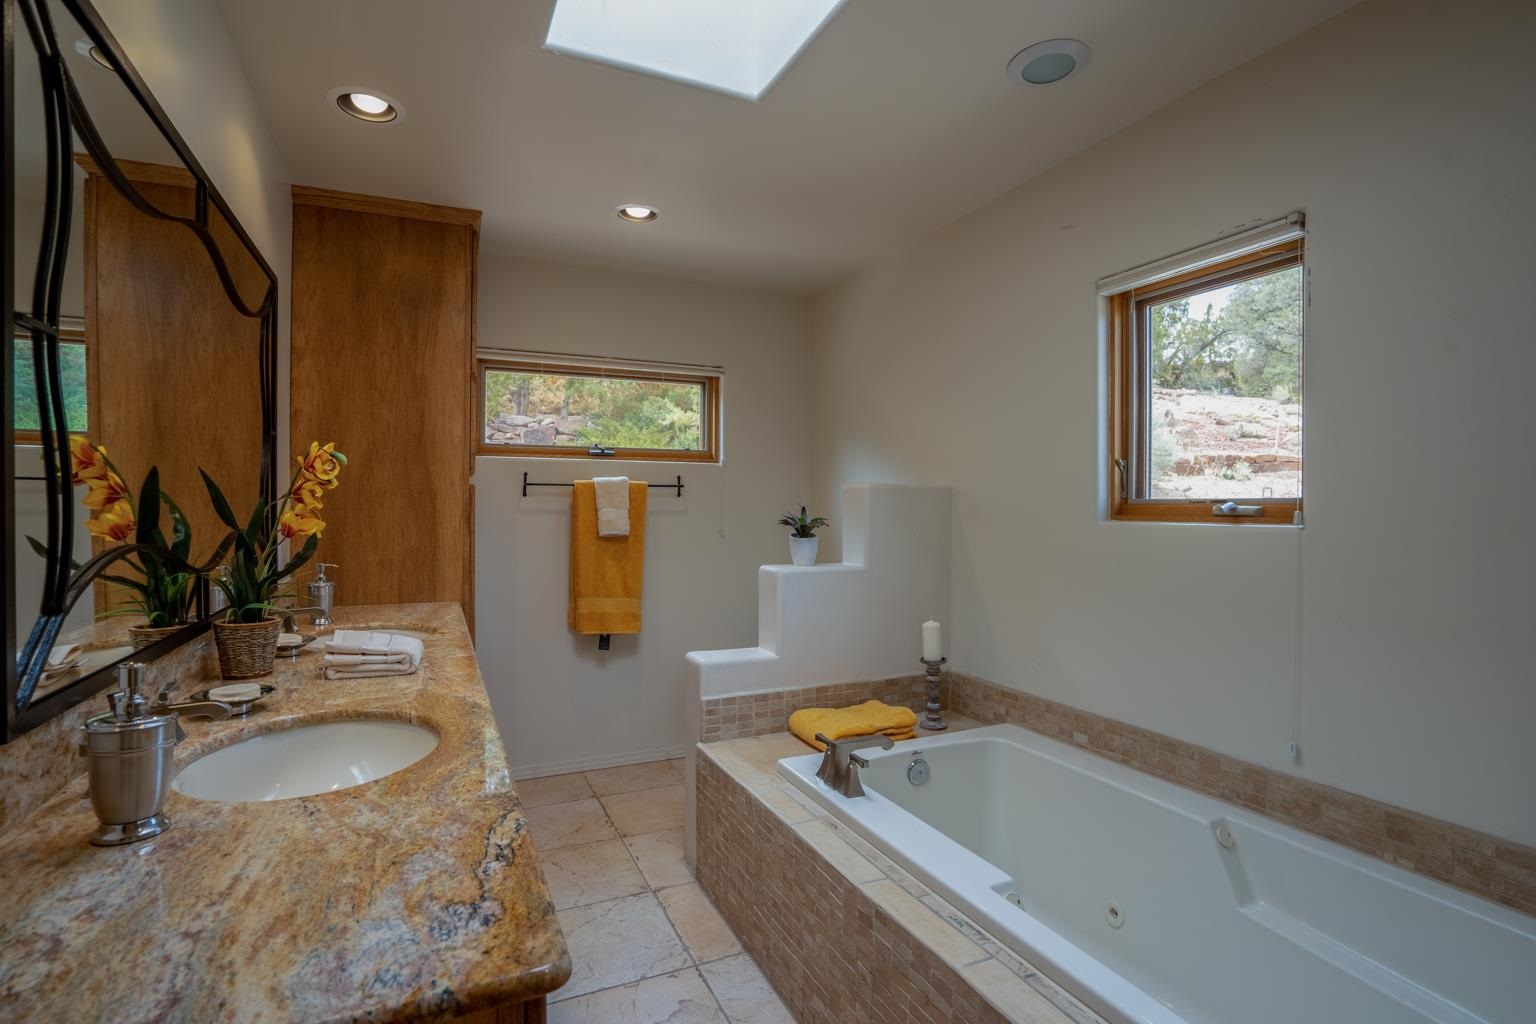 105 Michelle, Santa Fe, New Mexico 87501, 4 Bedrooms Bedrooms, ,3 BathroomsBathrooms,Residential,For Sale,105 Michelle,202102735